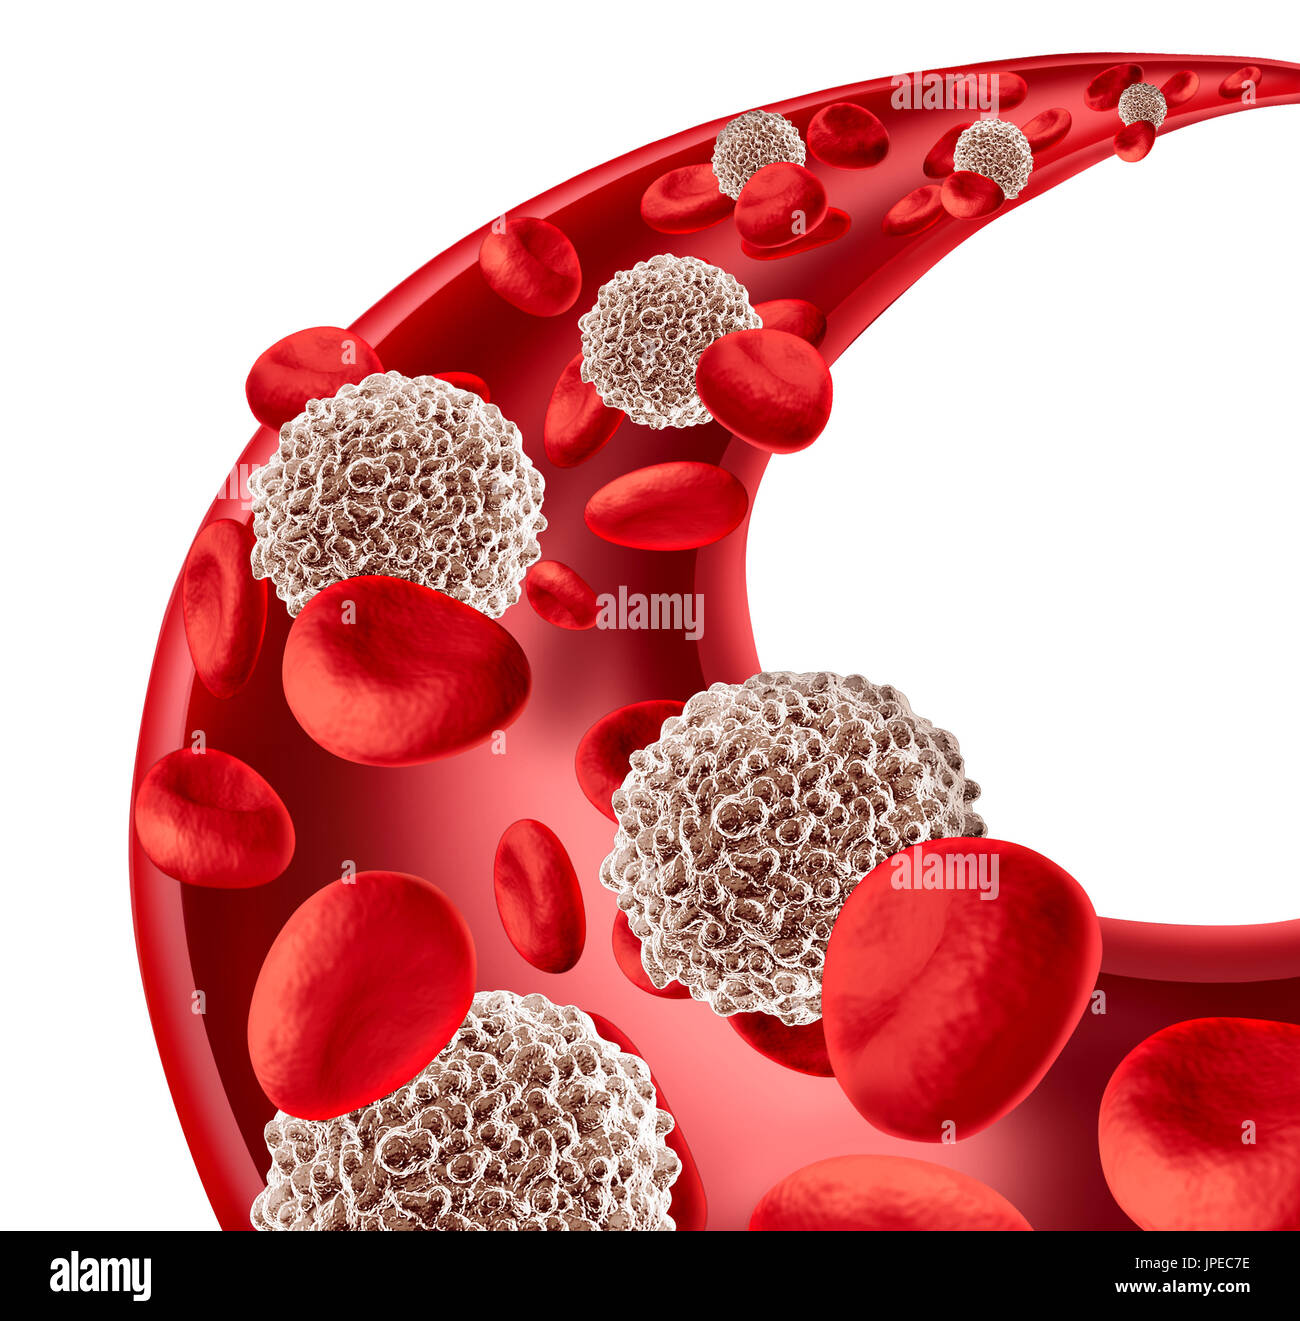 White blood cells circulation concept in a human artery flowing through red blood as a microbiology symbol of the human immune system. Stock Photo